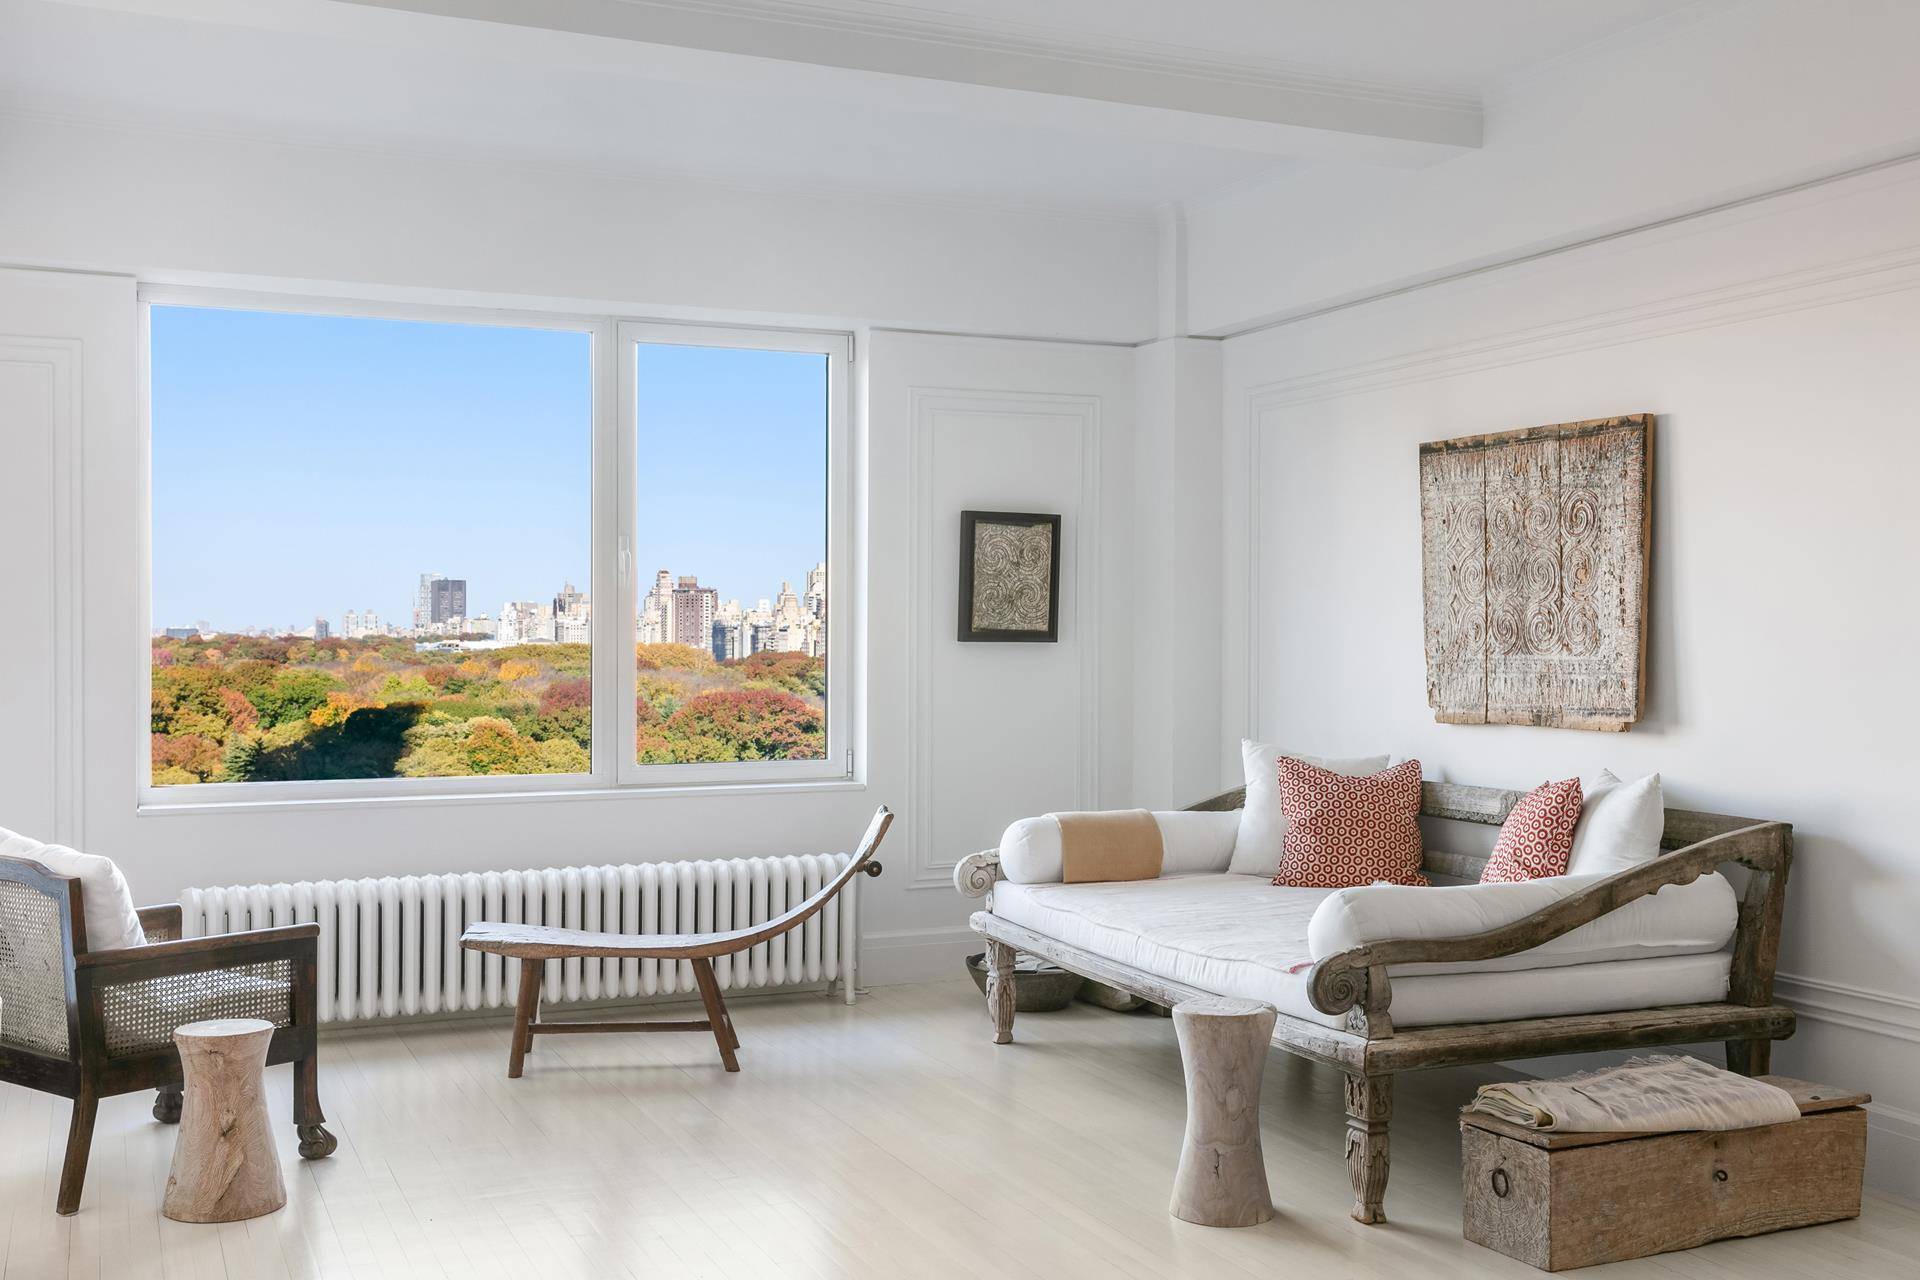 Floating high above Central Park, this triple mint residence was recently renovated with extreme attention to detail and offers spectacular direct Central Park views.